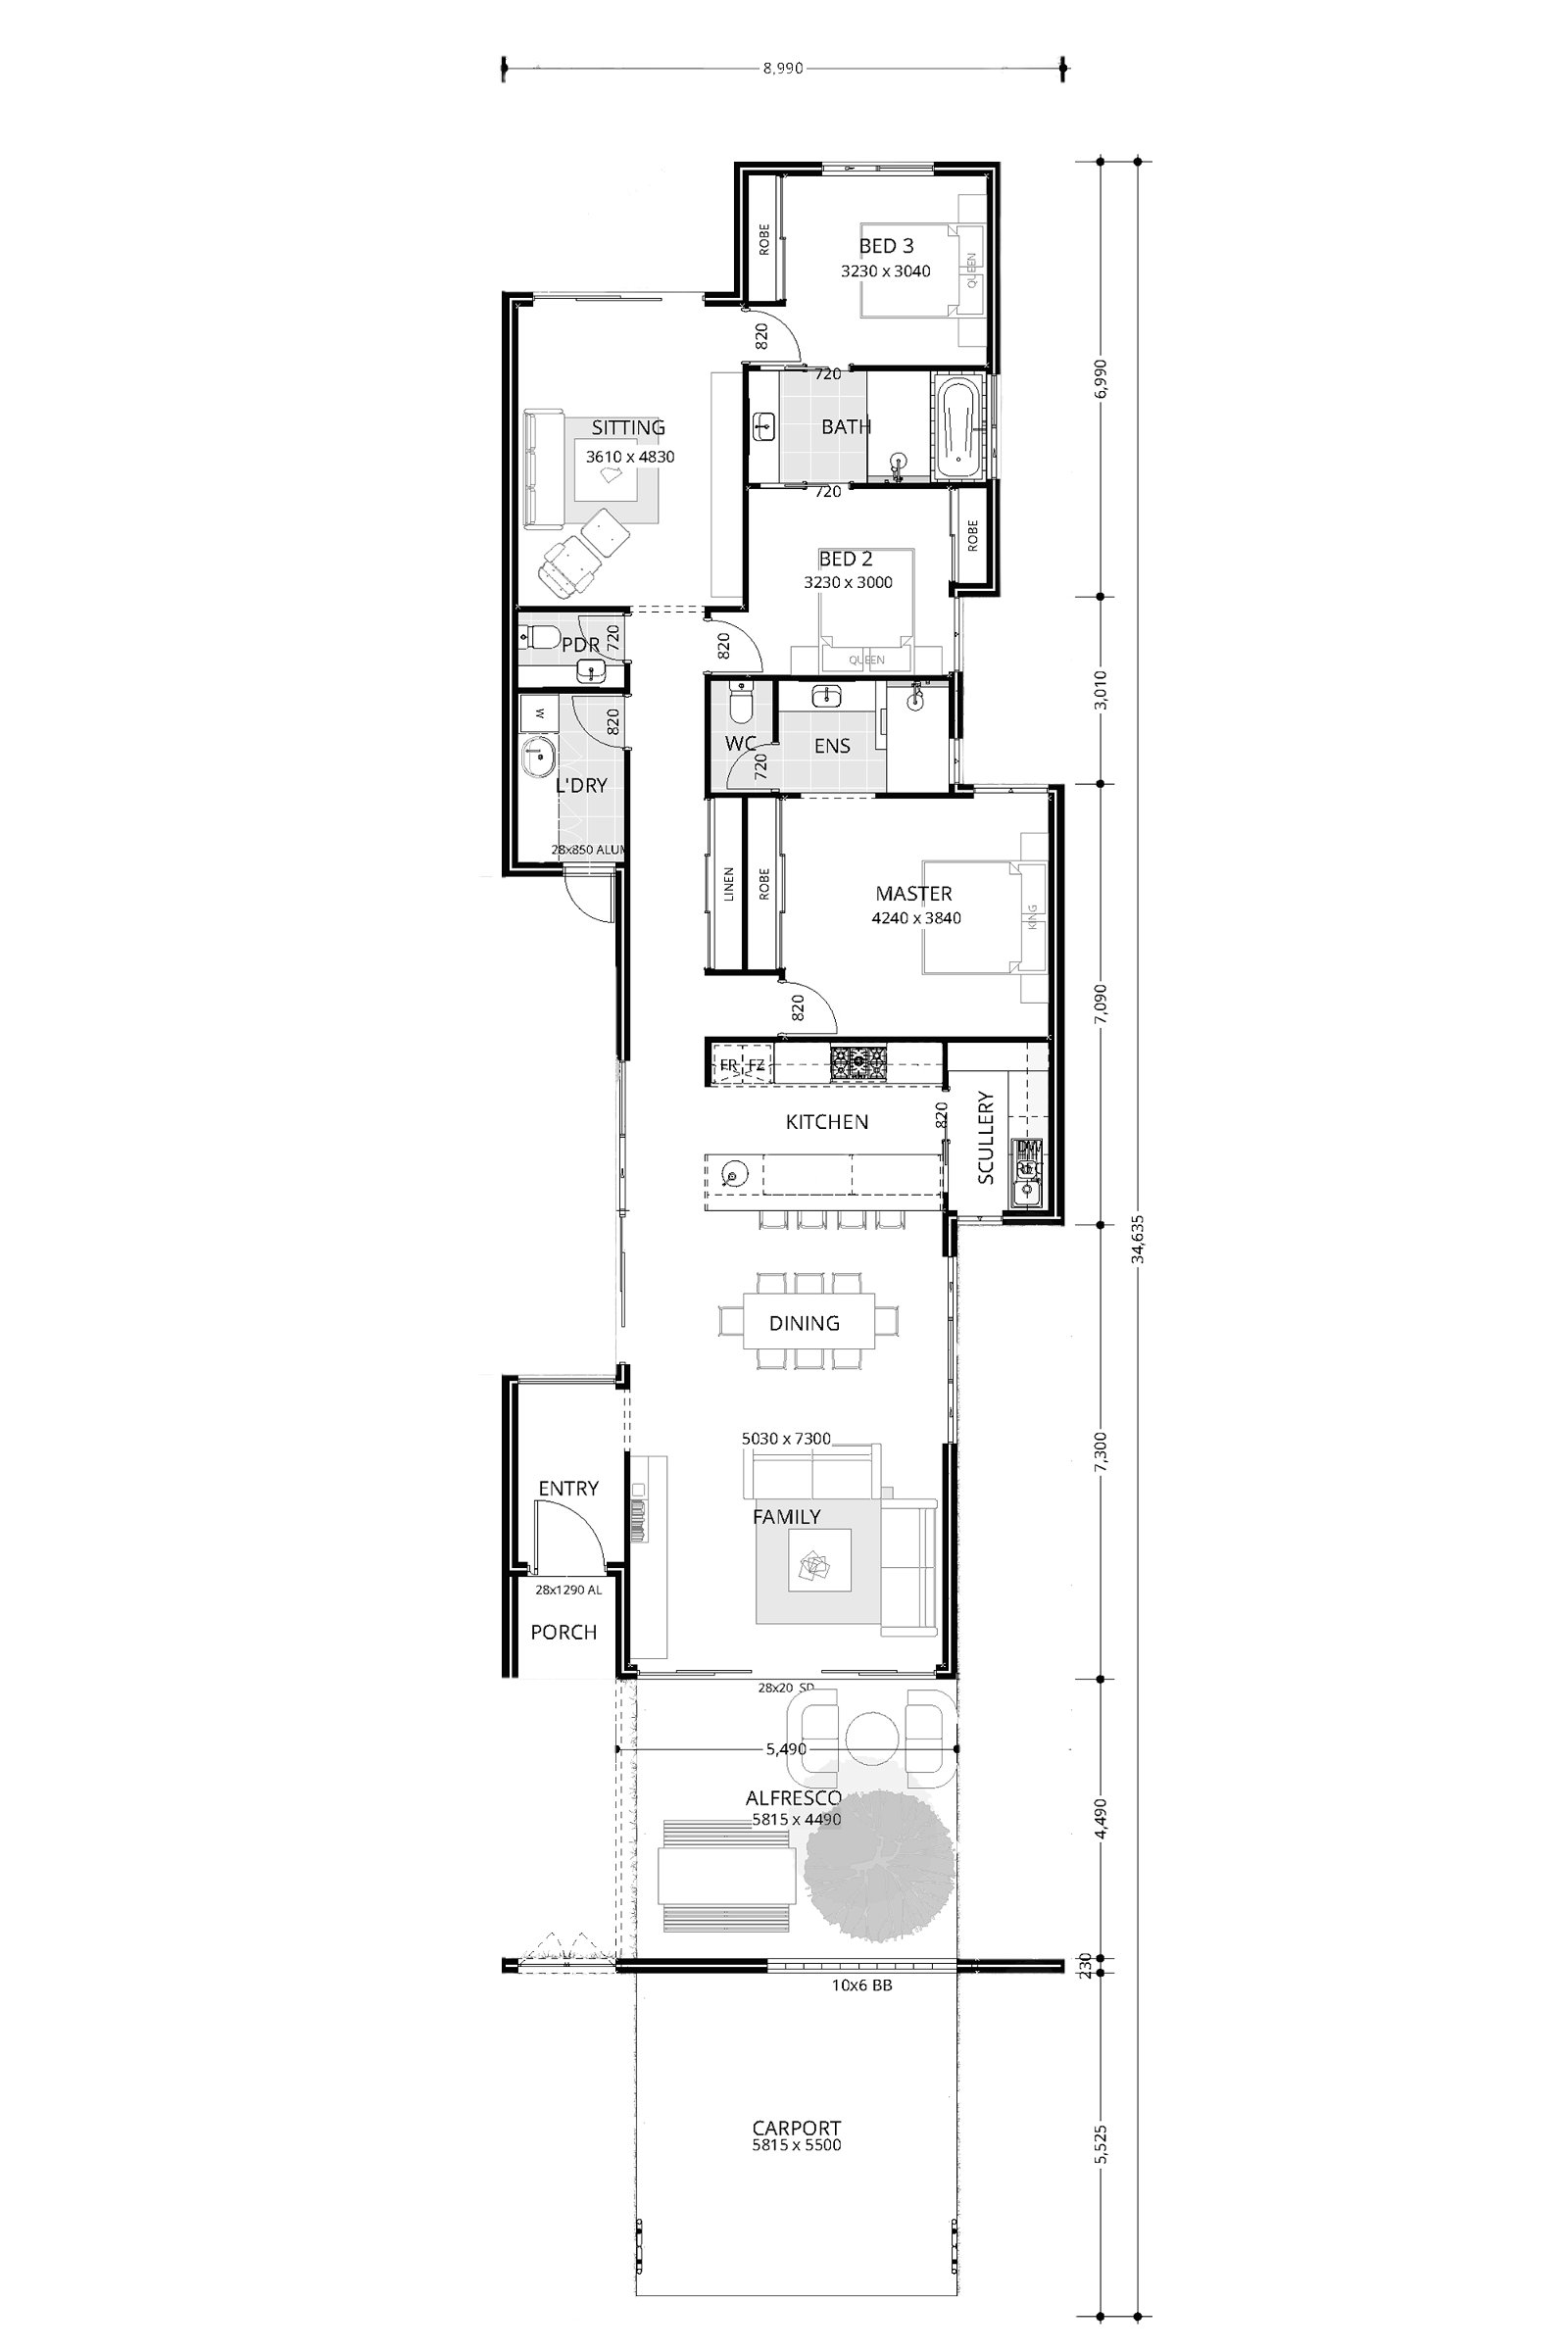 Residential Attitudes - The Late Night Show - Floorplan - The Late Night Show Floorplan Website